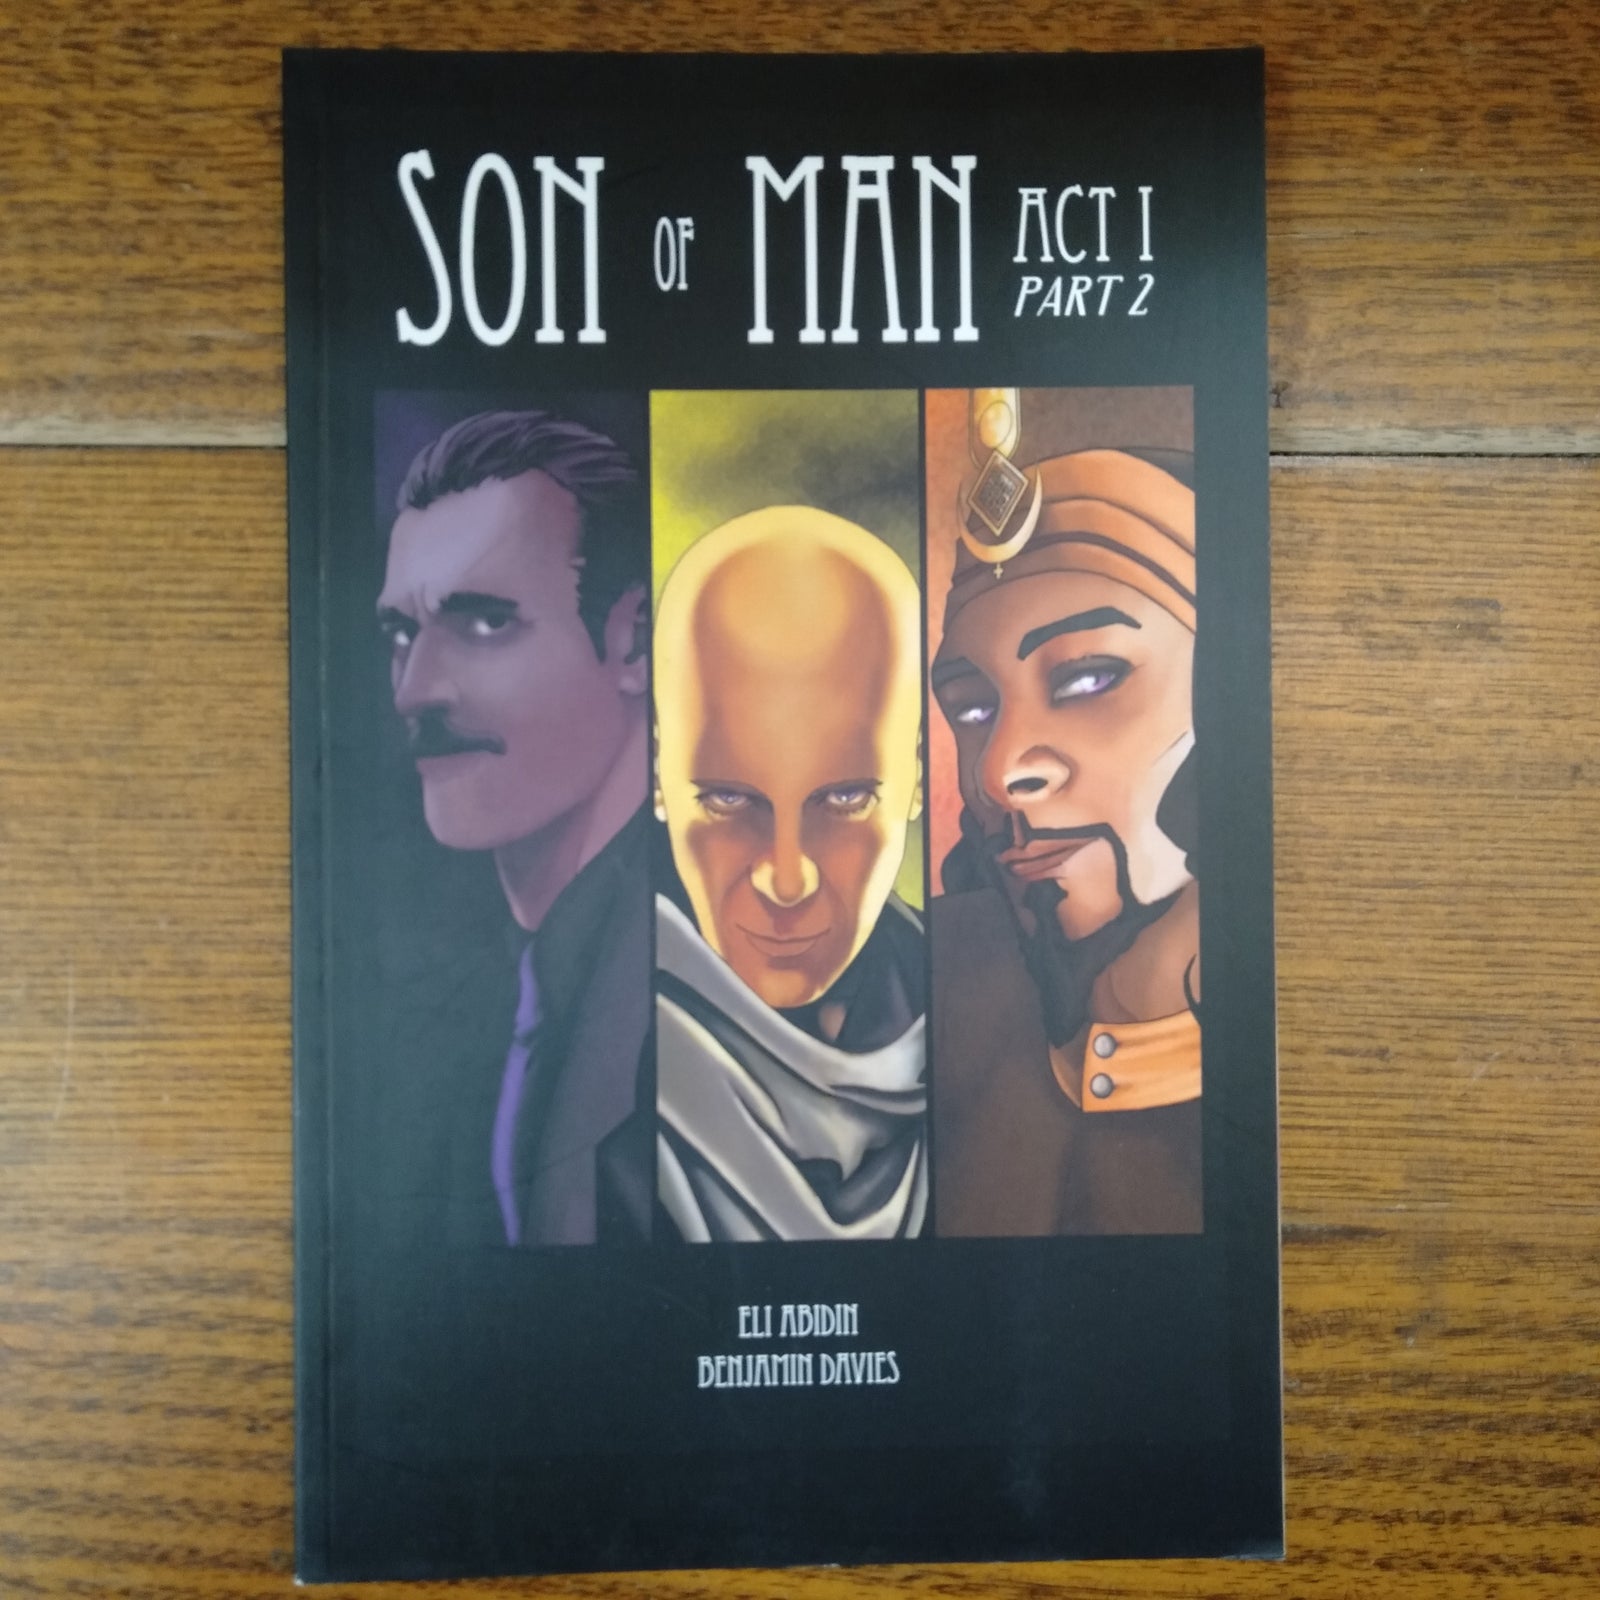 Son of Man - Act I Part 2